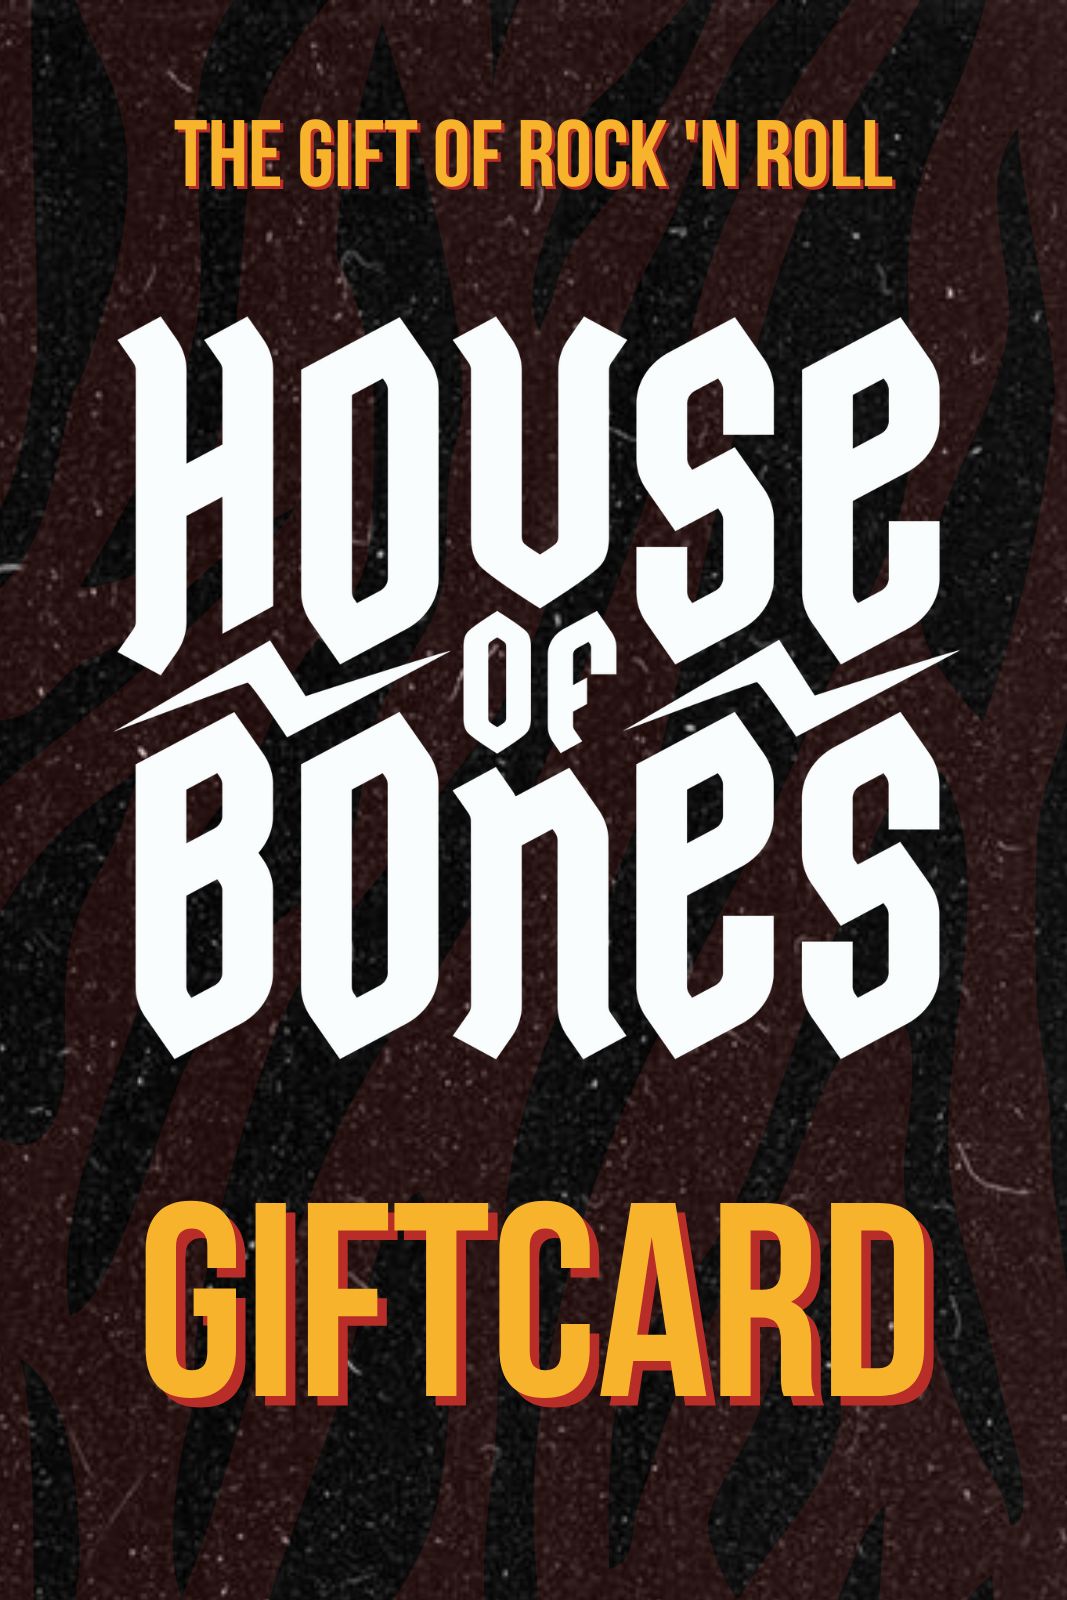 Giftcard for online rock and roll store house of bones